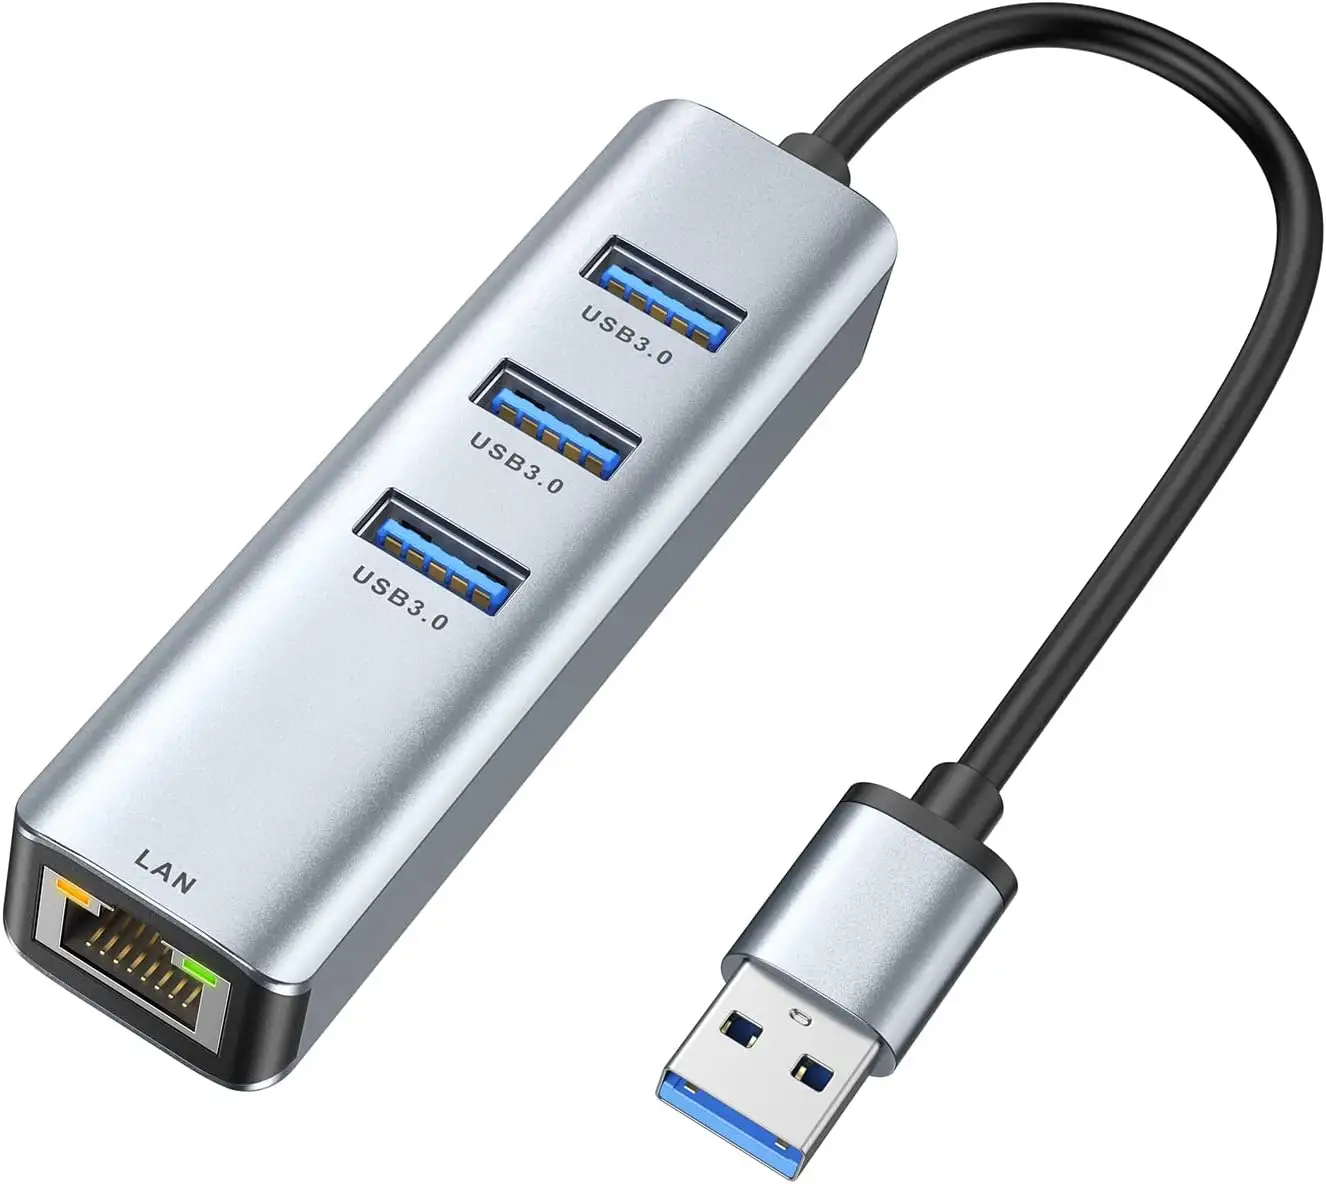 USB to Ethernet Adapter USB 3.0 Hub with 100/1000 Mbps RJ45 Ethernet Driver Free Aluminum 4-in-1 USB-A to LAN Network Adapter